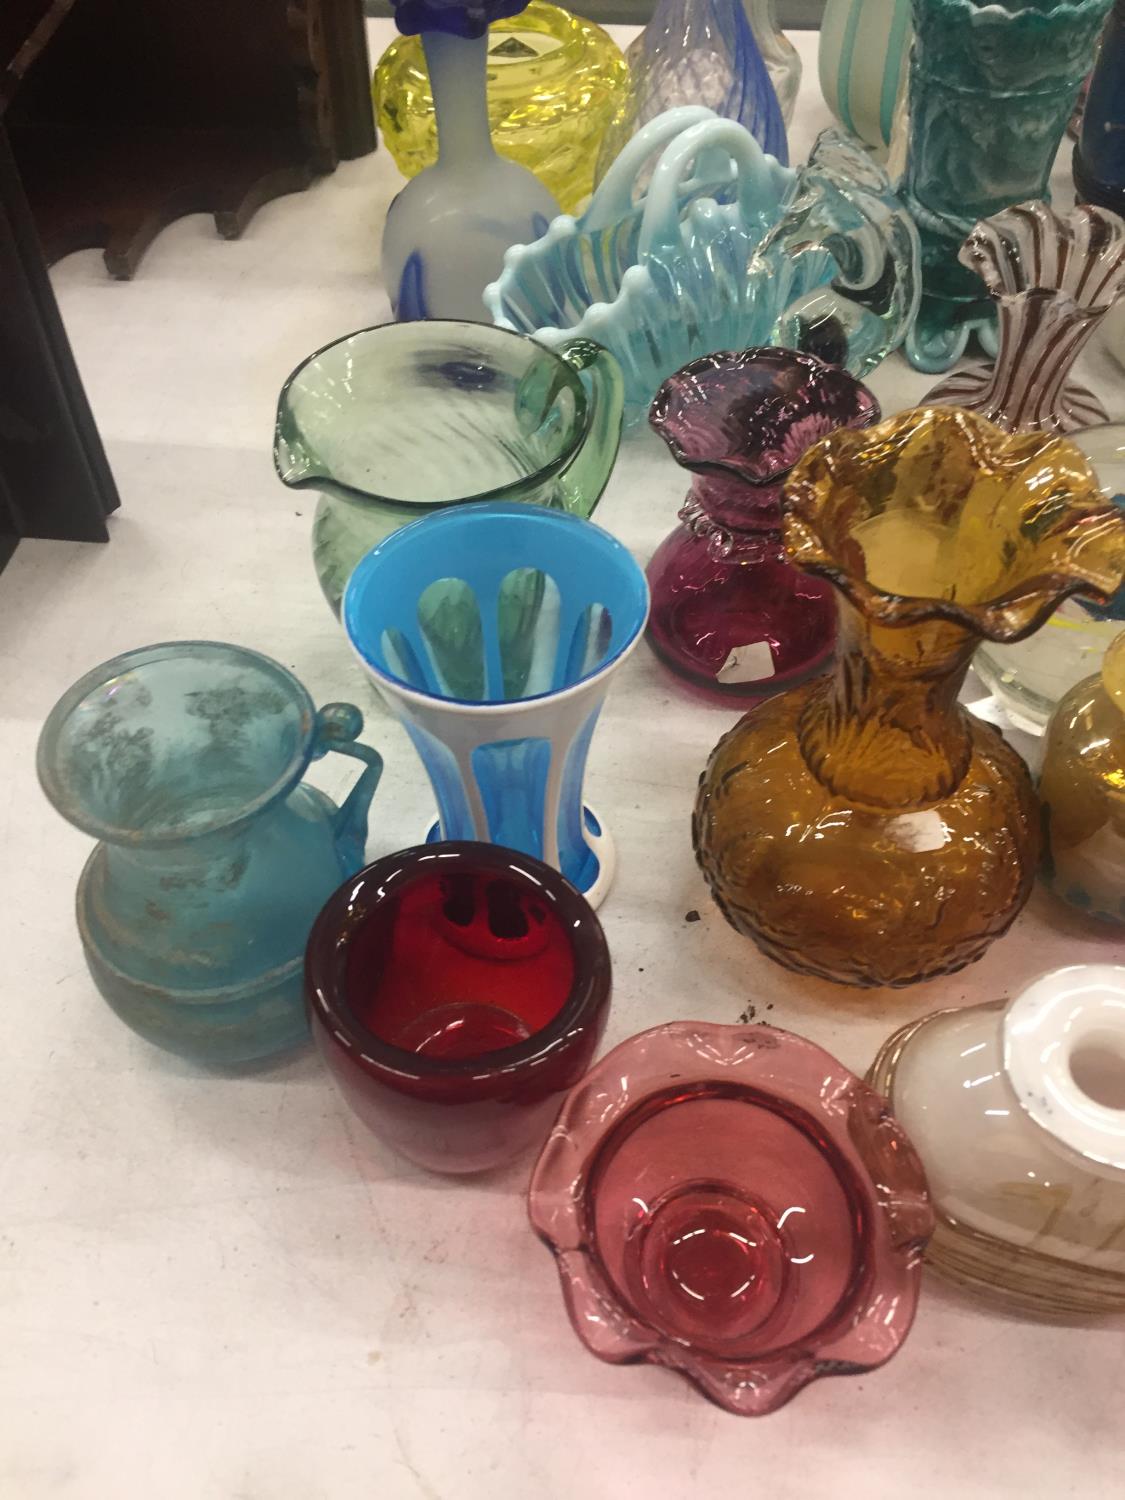 A LARGE QUANTITY OF COLOURED STUDIO ART GLASSWARE TO INCLUDE BOWLS, VASES, PAPERWEIGHTS, ETC - Image 2 of 7